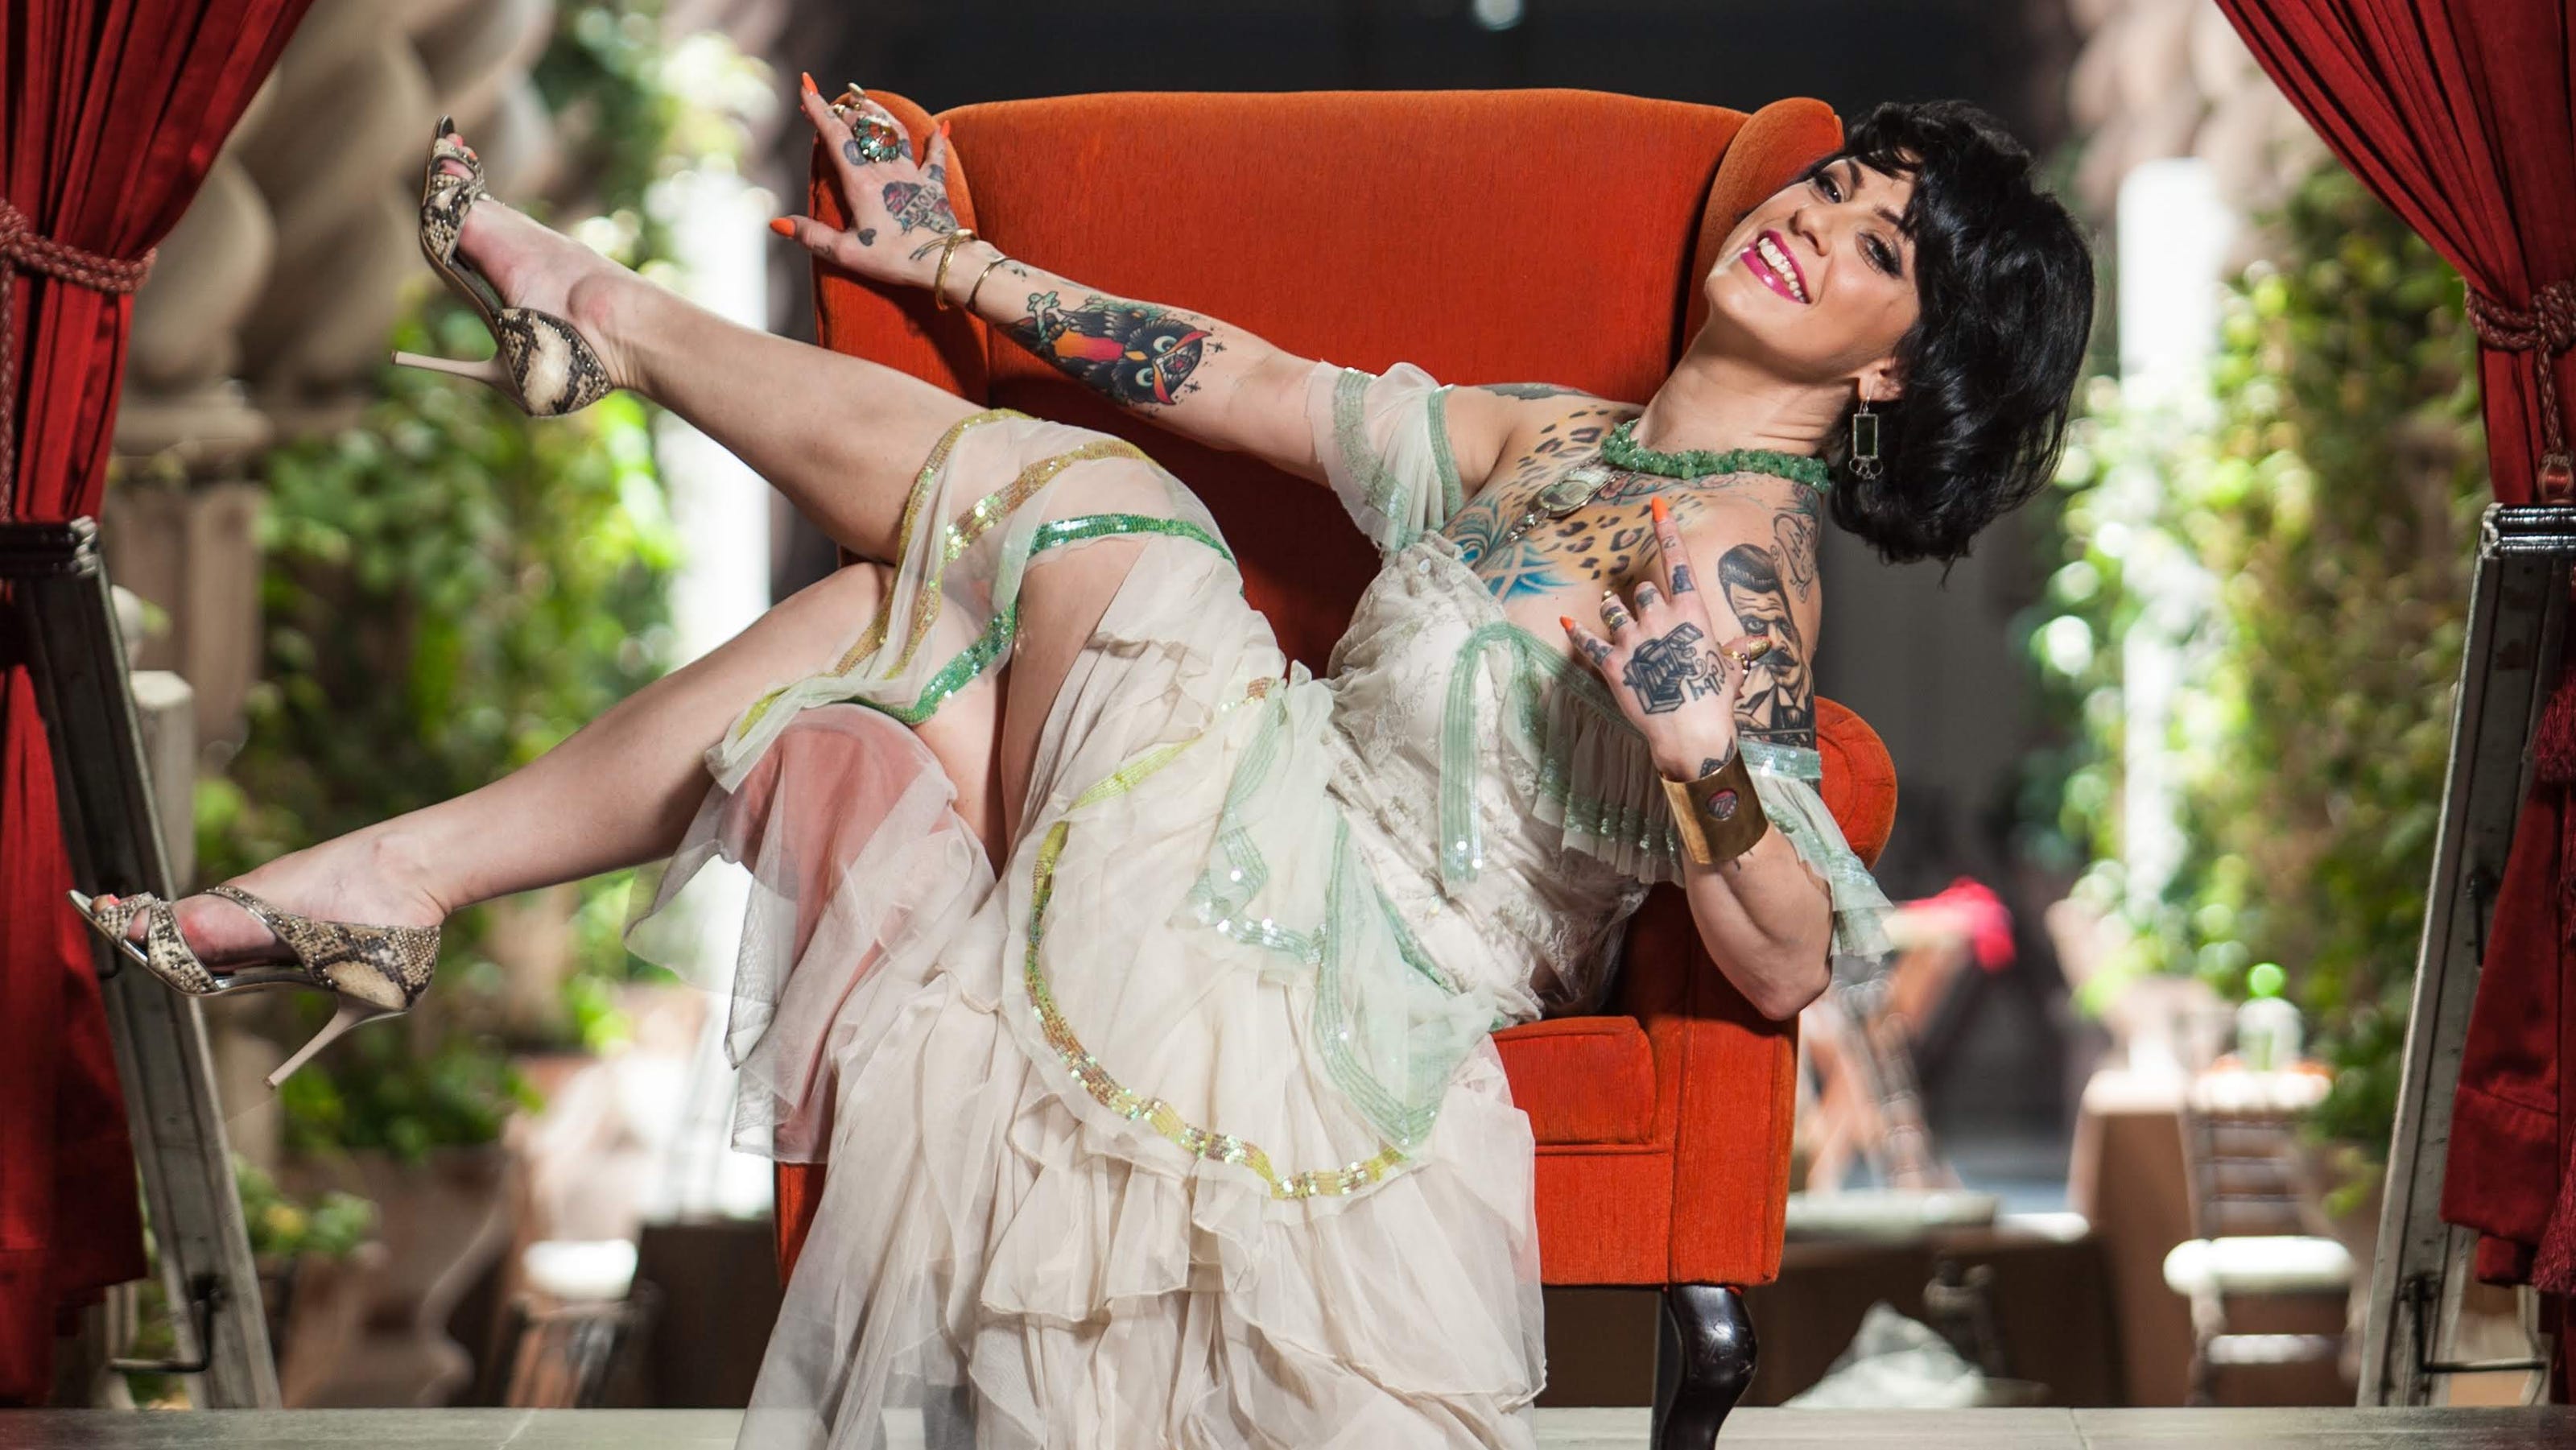 American Pickers' co-star Danielle Colby will dance for a cause in Fou...